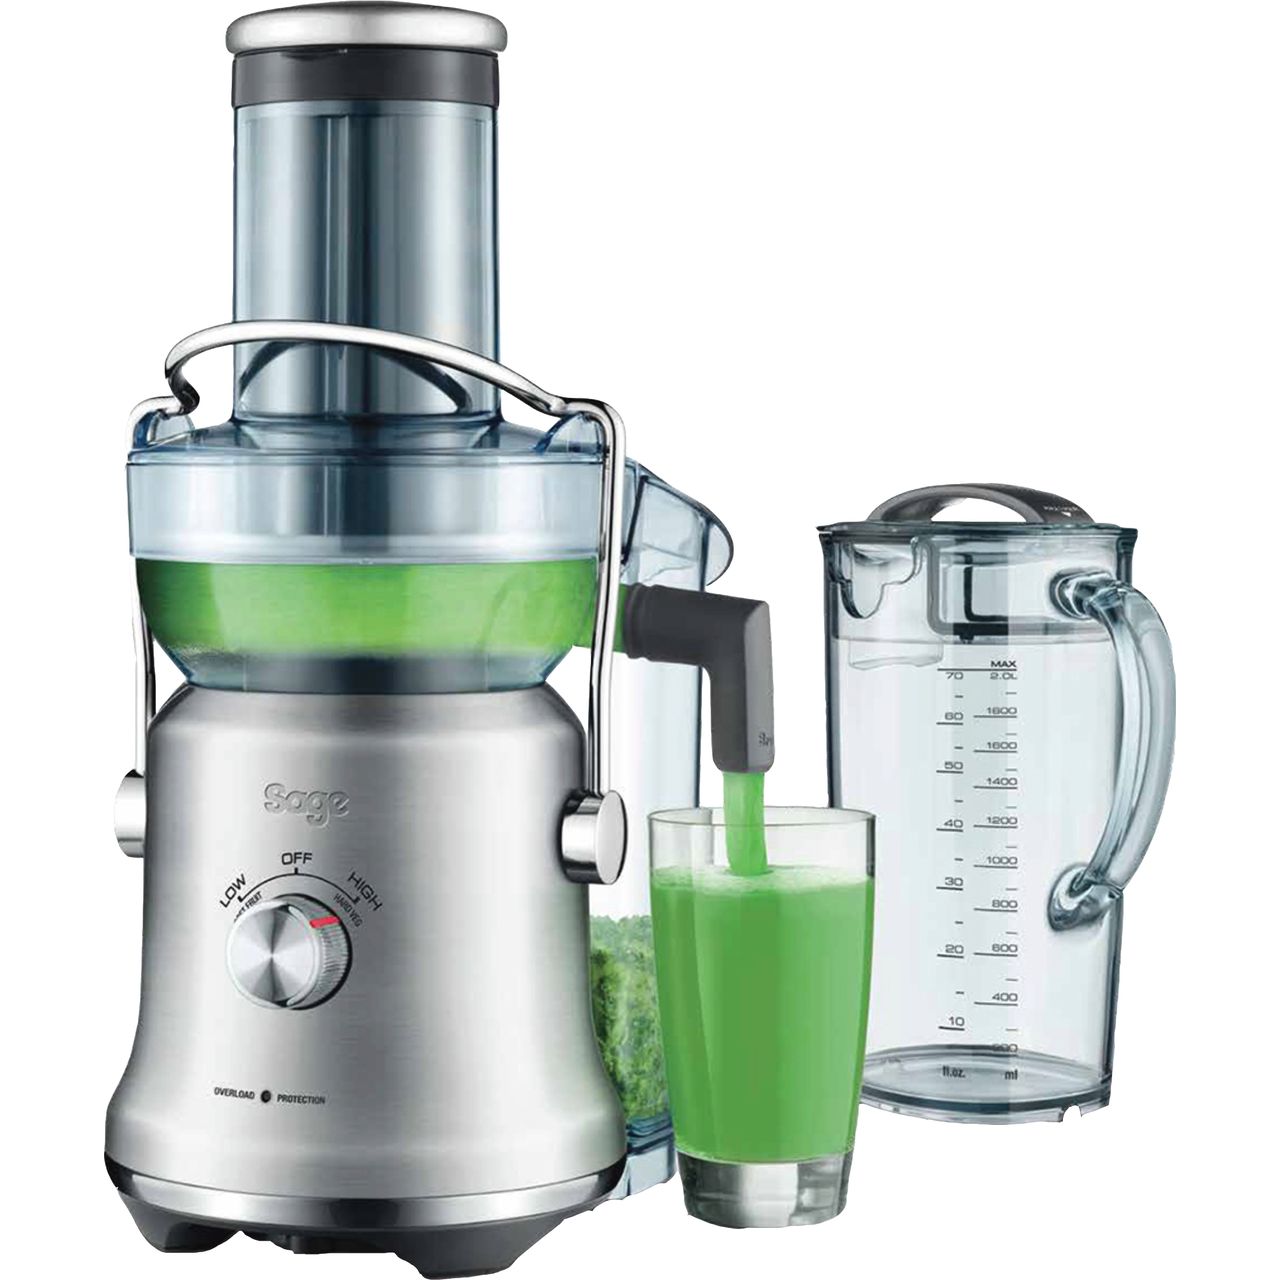 Sage The Nutri Juicer XL SJE830BSS Centrifugal Juicer Review